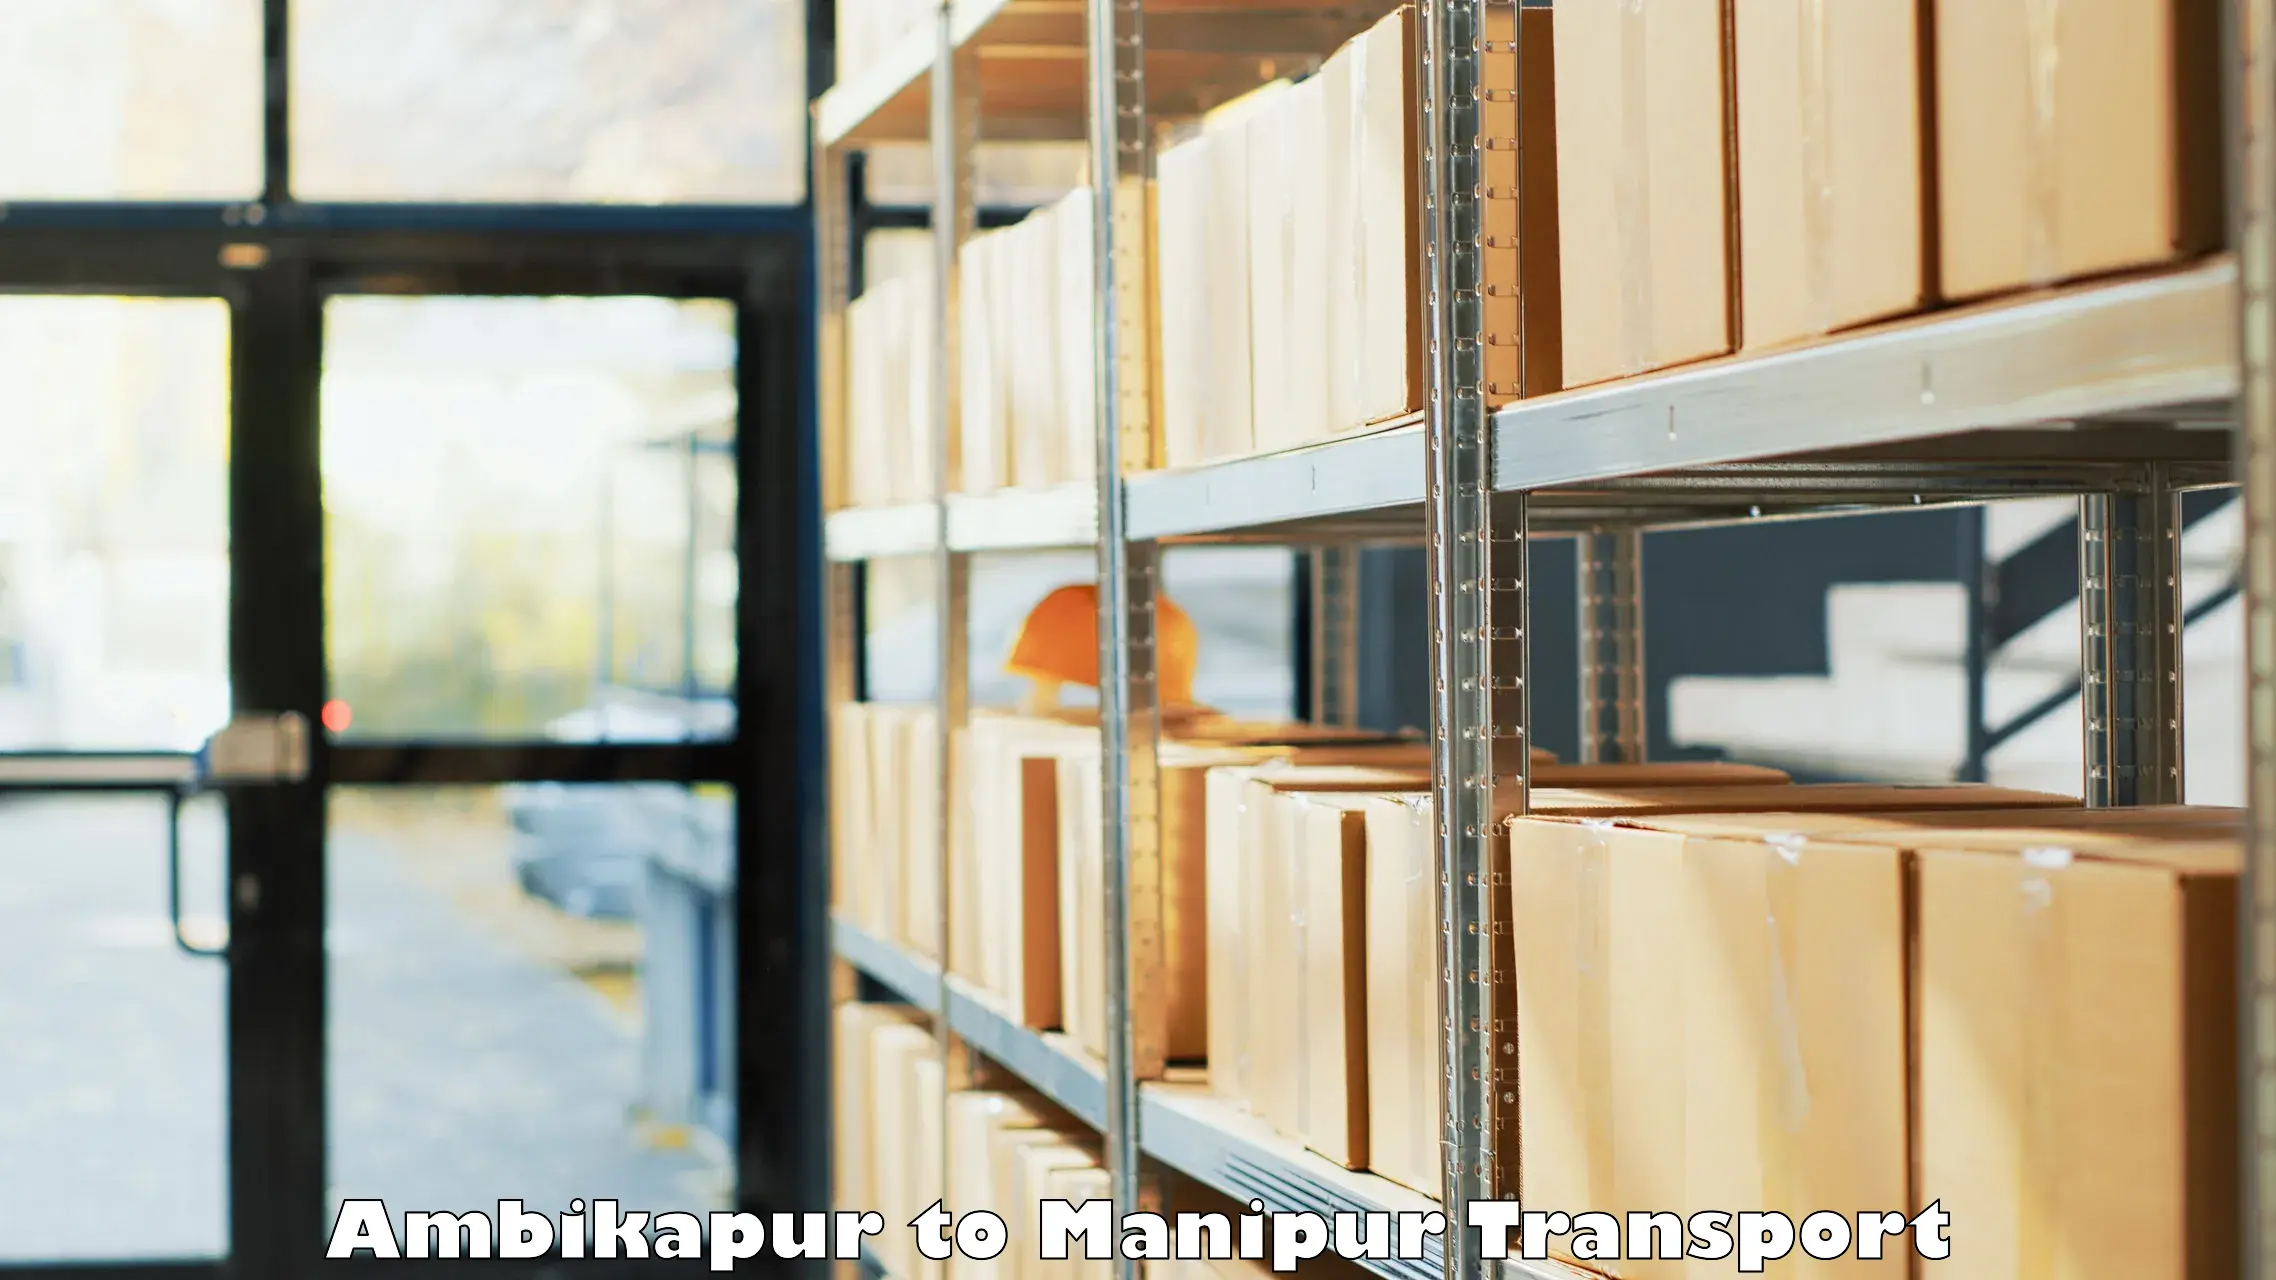 Container transport service Ambikapur to Manipur